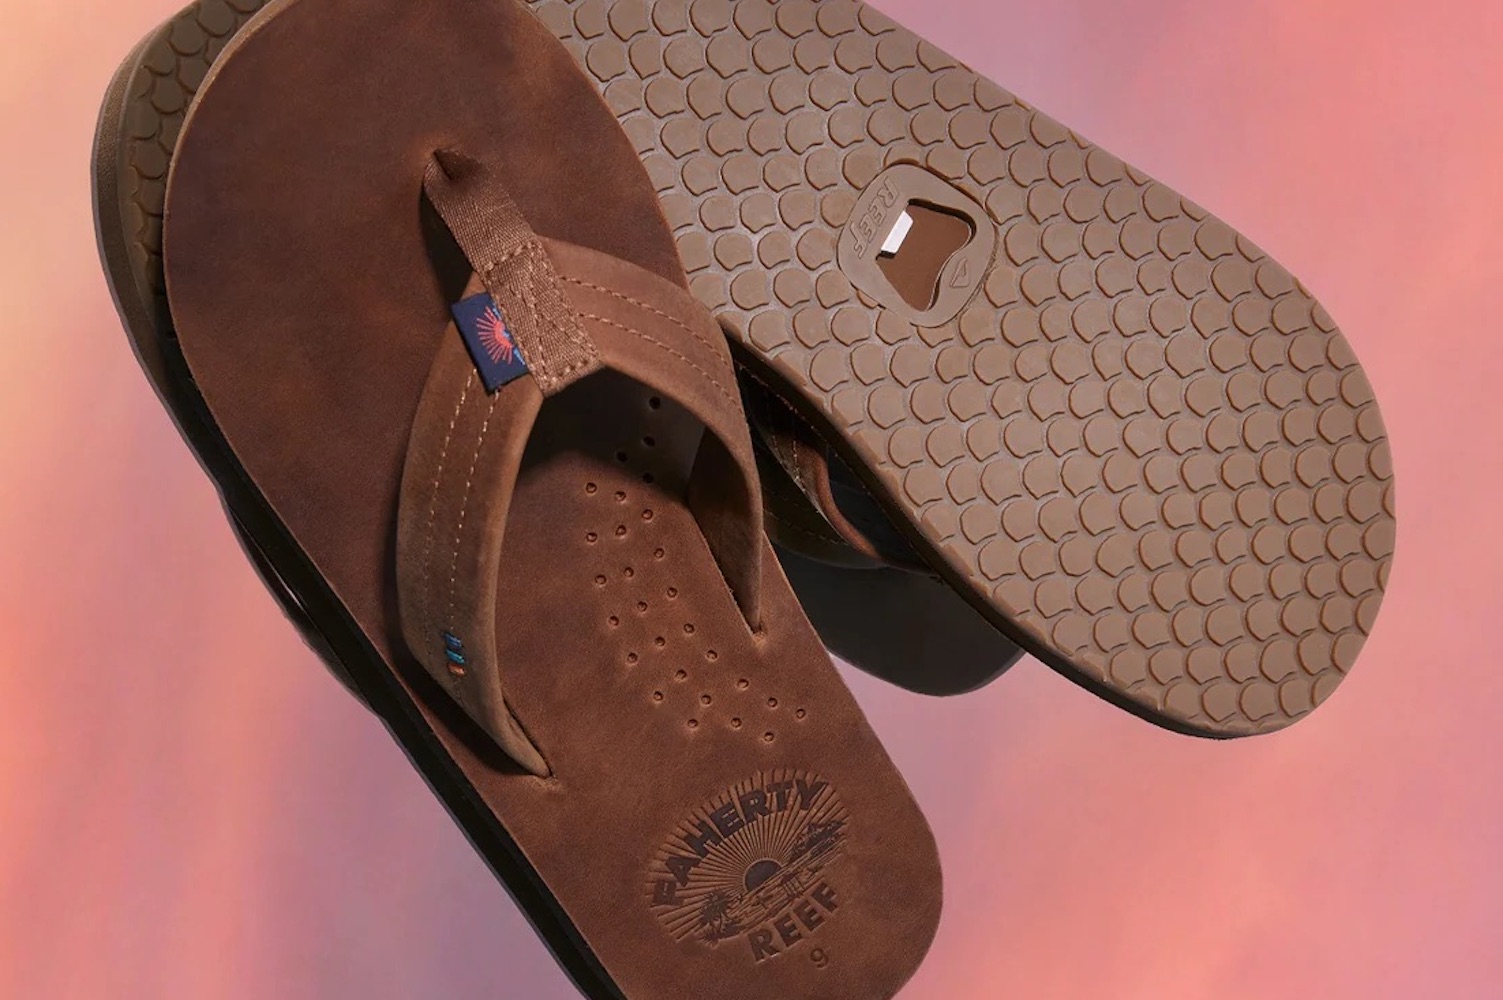 a pair of Reef x Faherty flip flops on a pink background